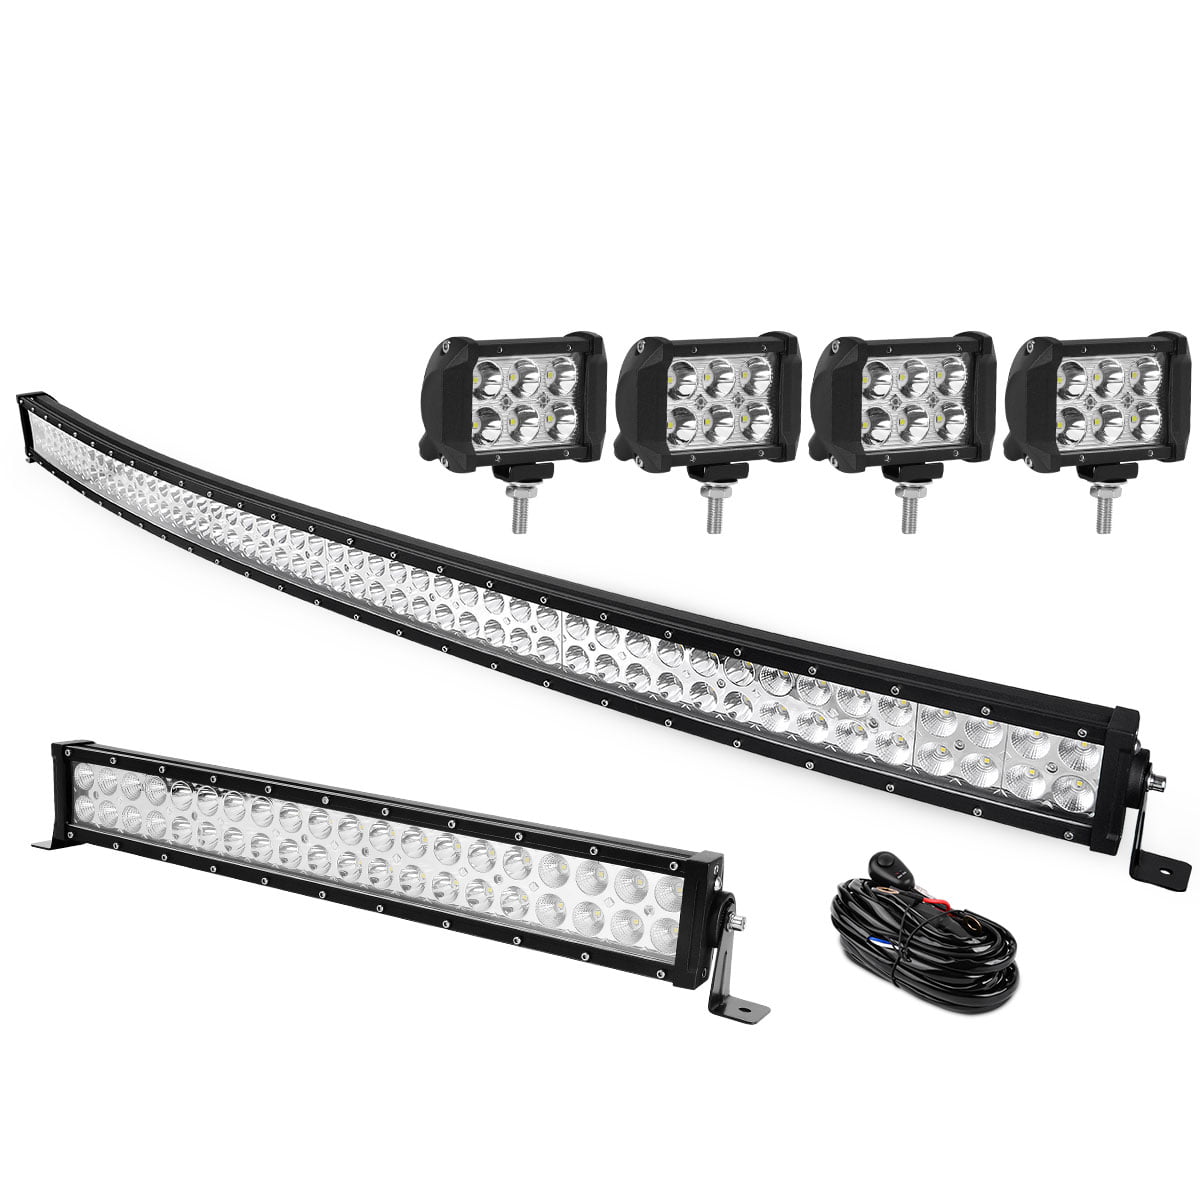 Curved 52"inch LED Light Bar 900W 9D Combo Offroad SUV Tractor ATV Driving Lamp